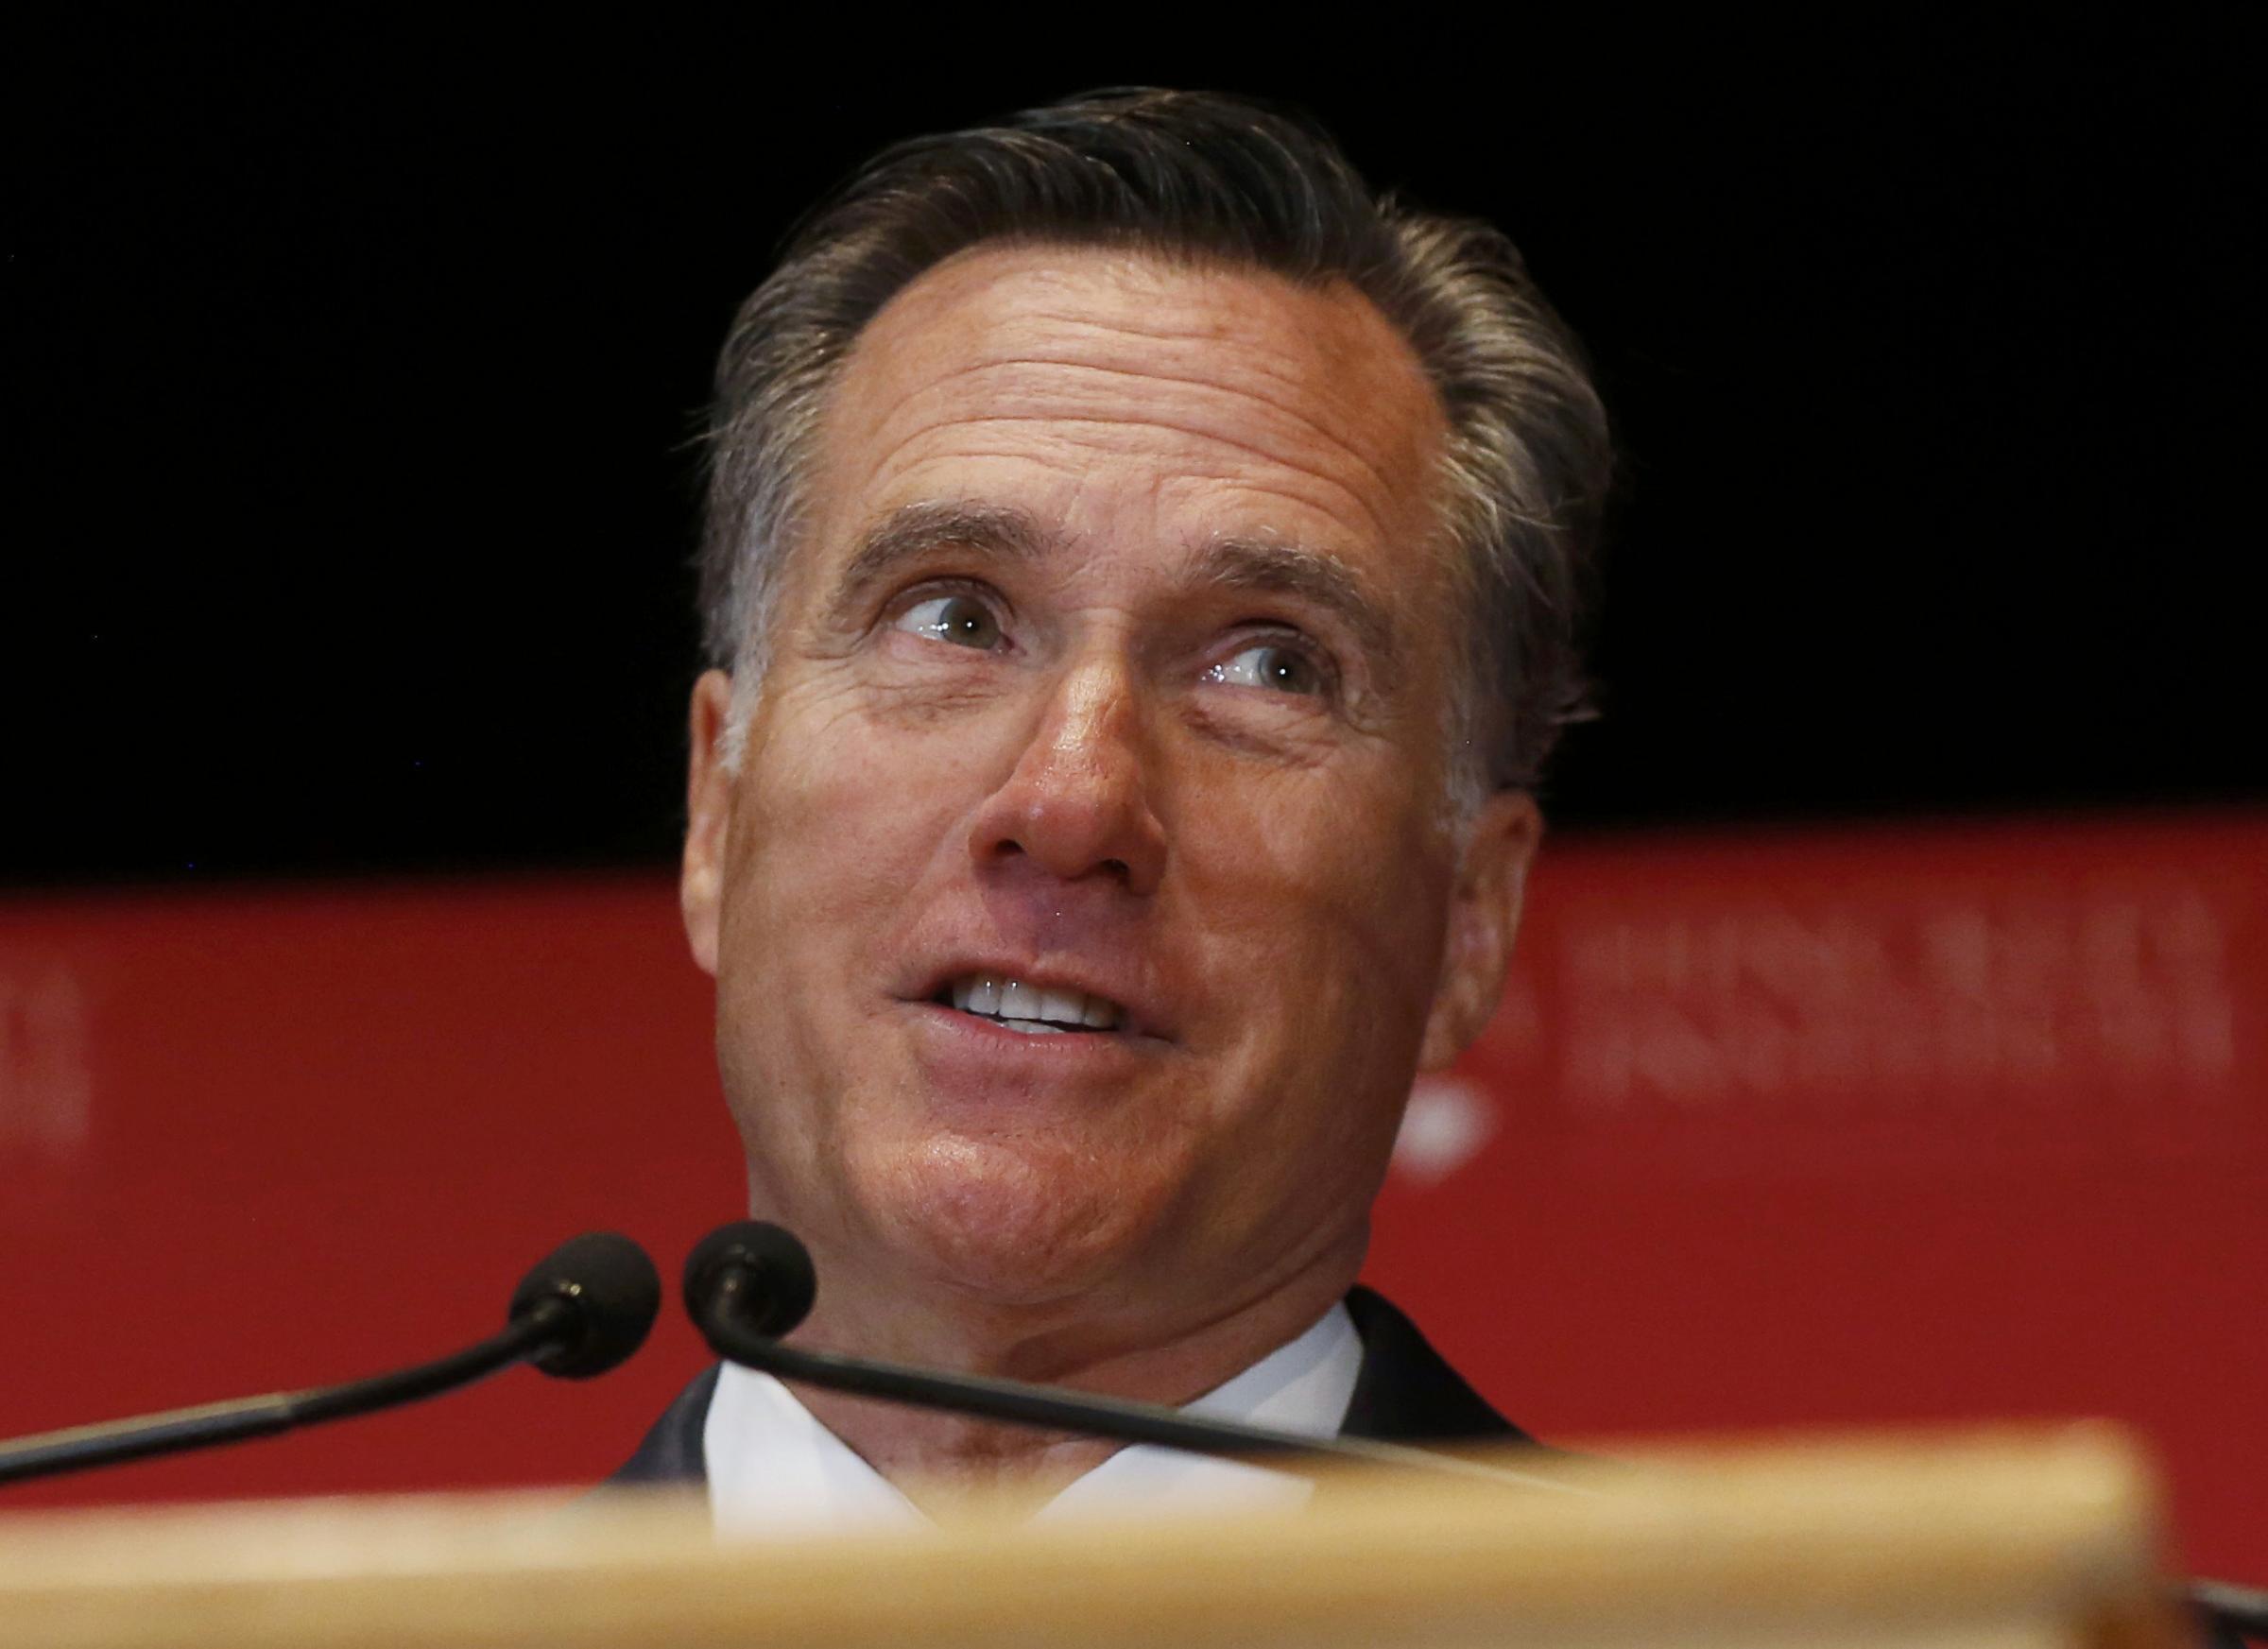 Former Republican U.S. presidential nominee Mitt Romney speaks critically about current Republican presidential candidate Donald Trump and the state of the 2016 Republican presidential campaign during a speech at the Hinckley Institute of Politics at the